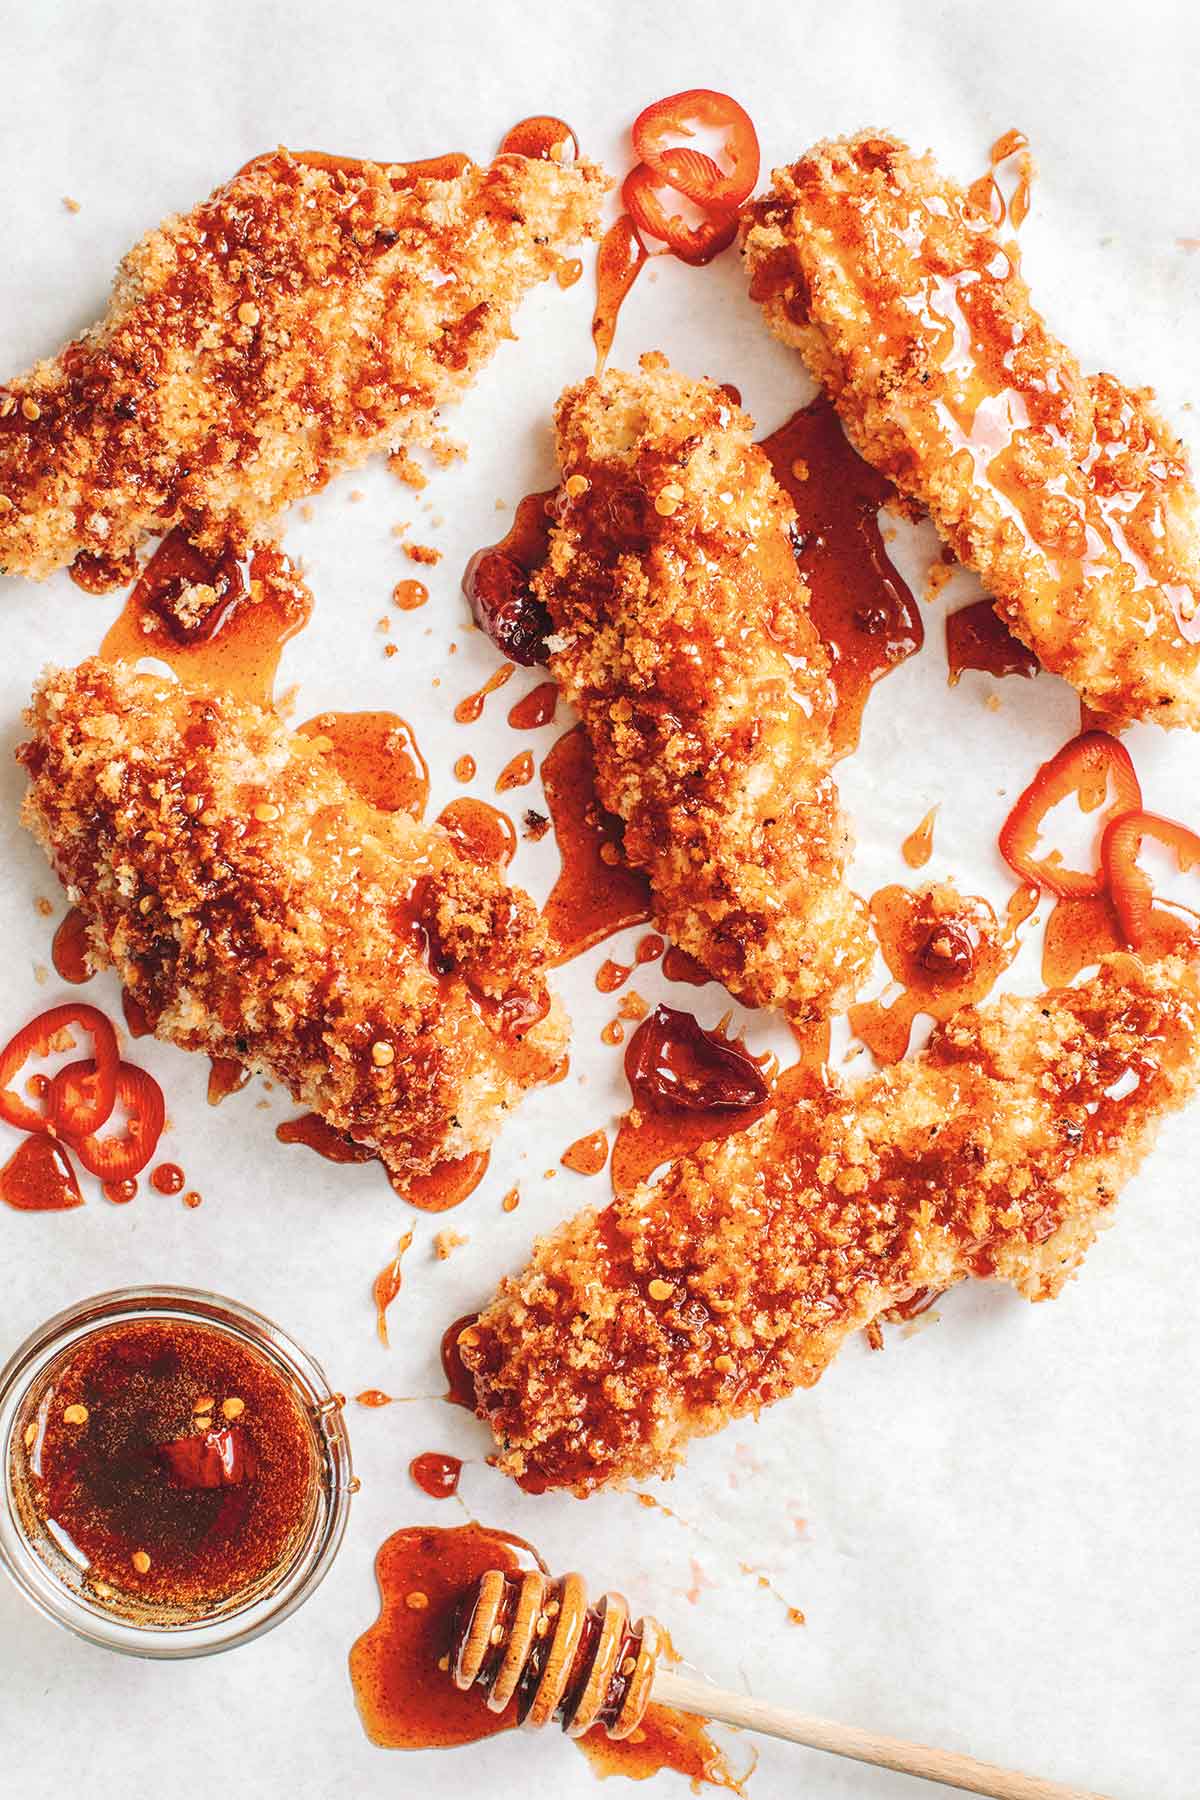 5 panko breaded chicken breasts drizzled with deep red hot sauce and chilli slices, accompanied by a bowl of spiced honey and a honey spoon.